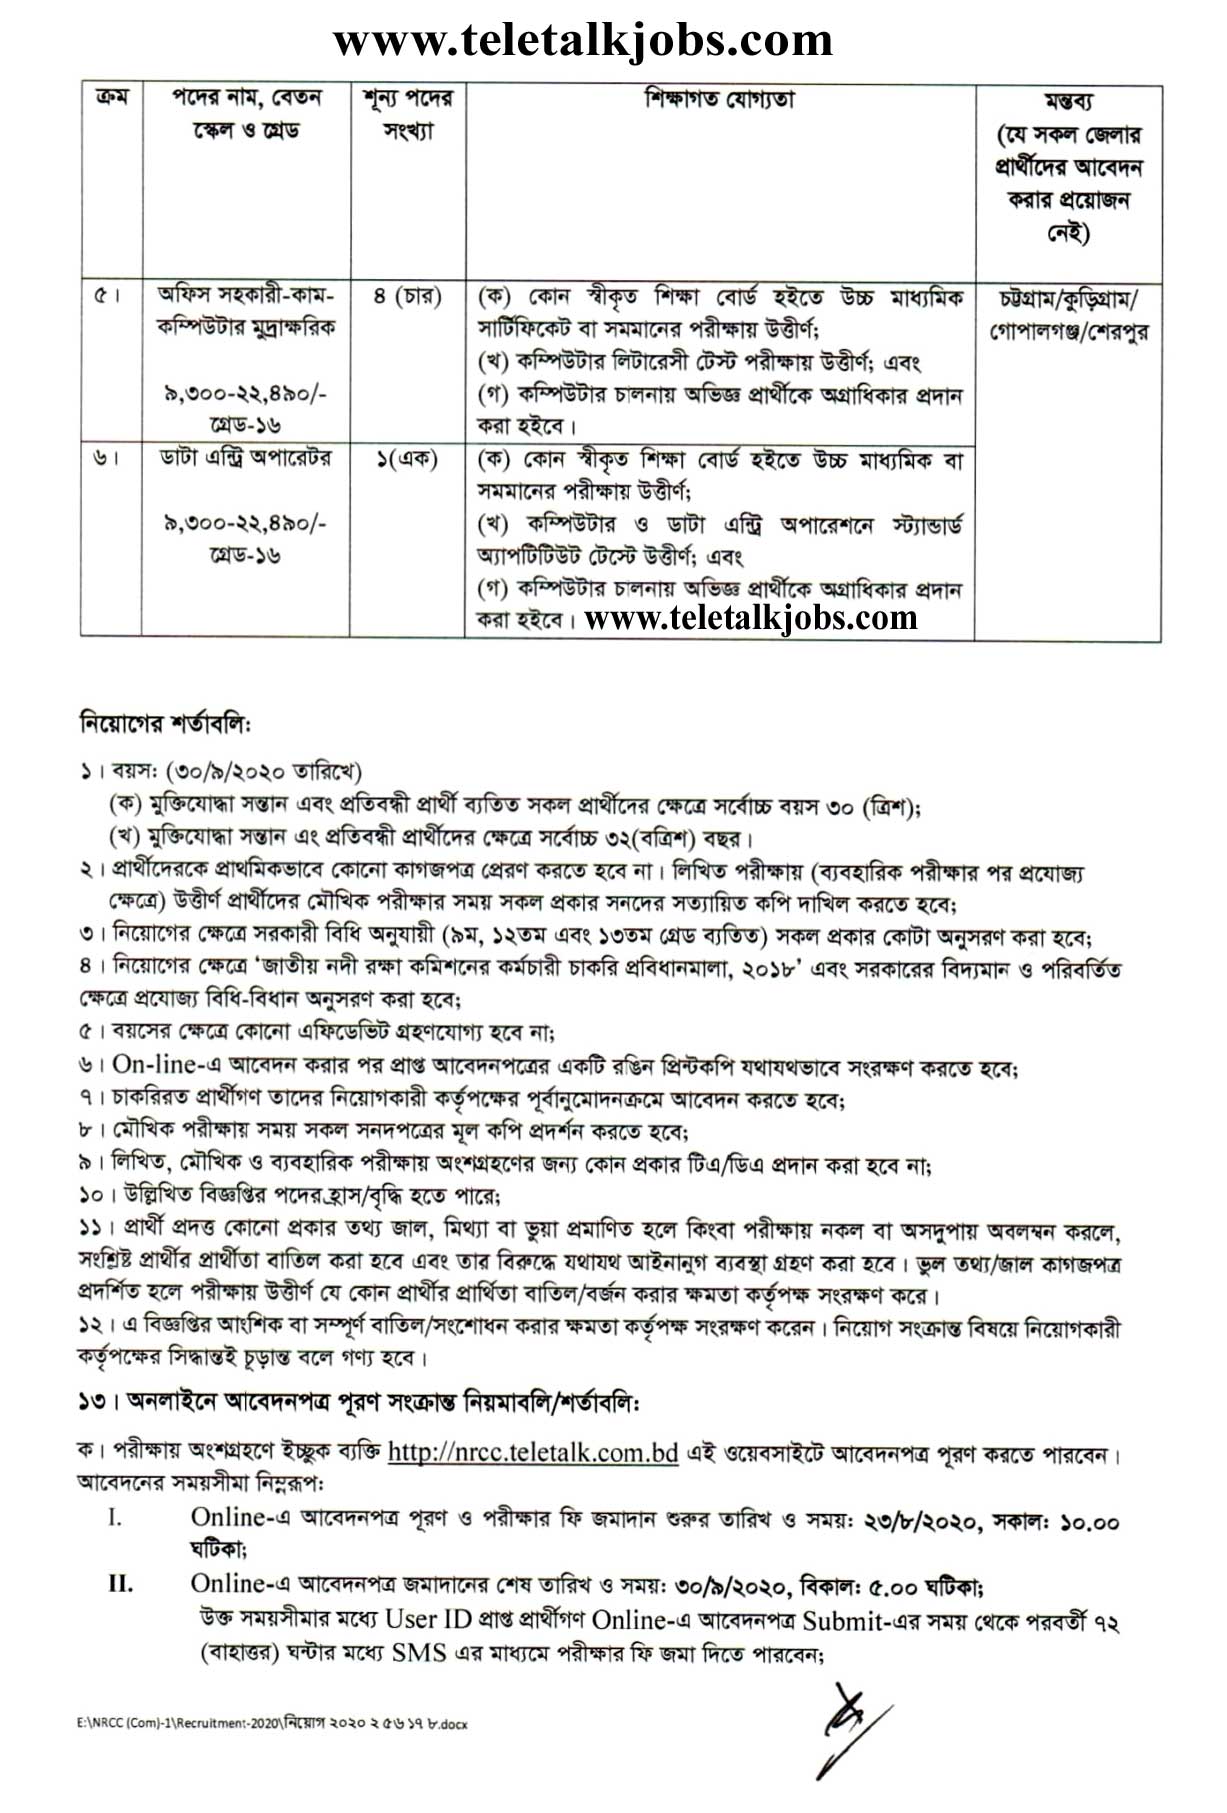 National River Conservation Commission Job Circular 2021